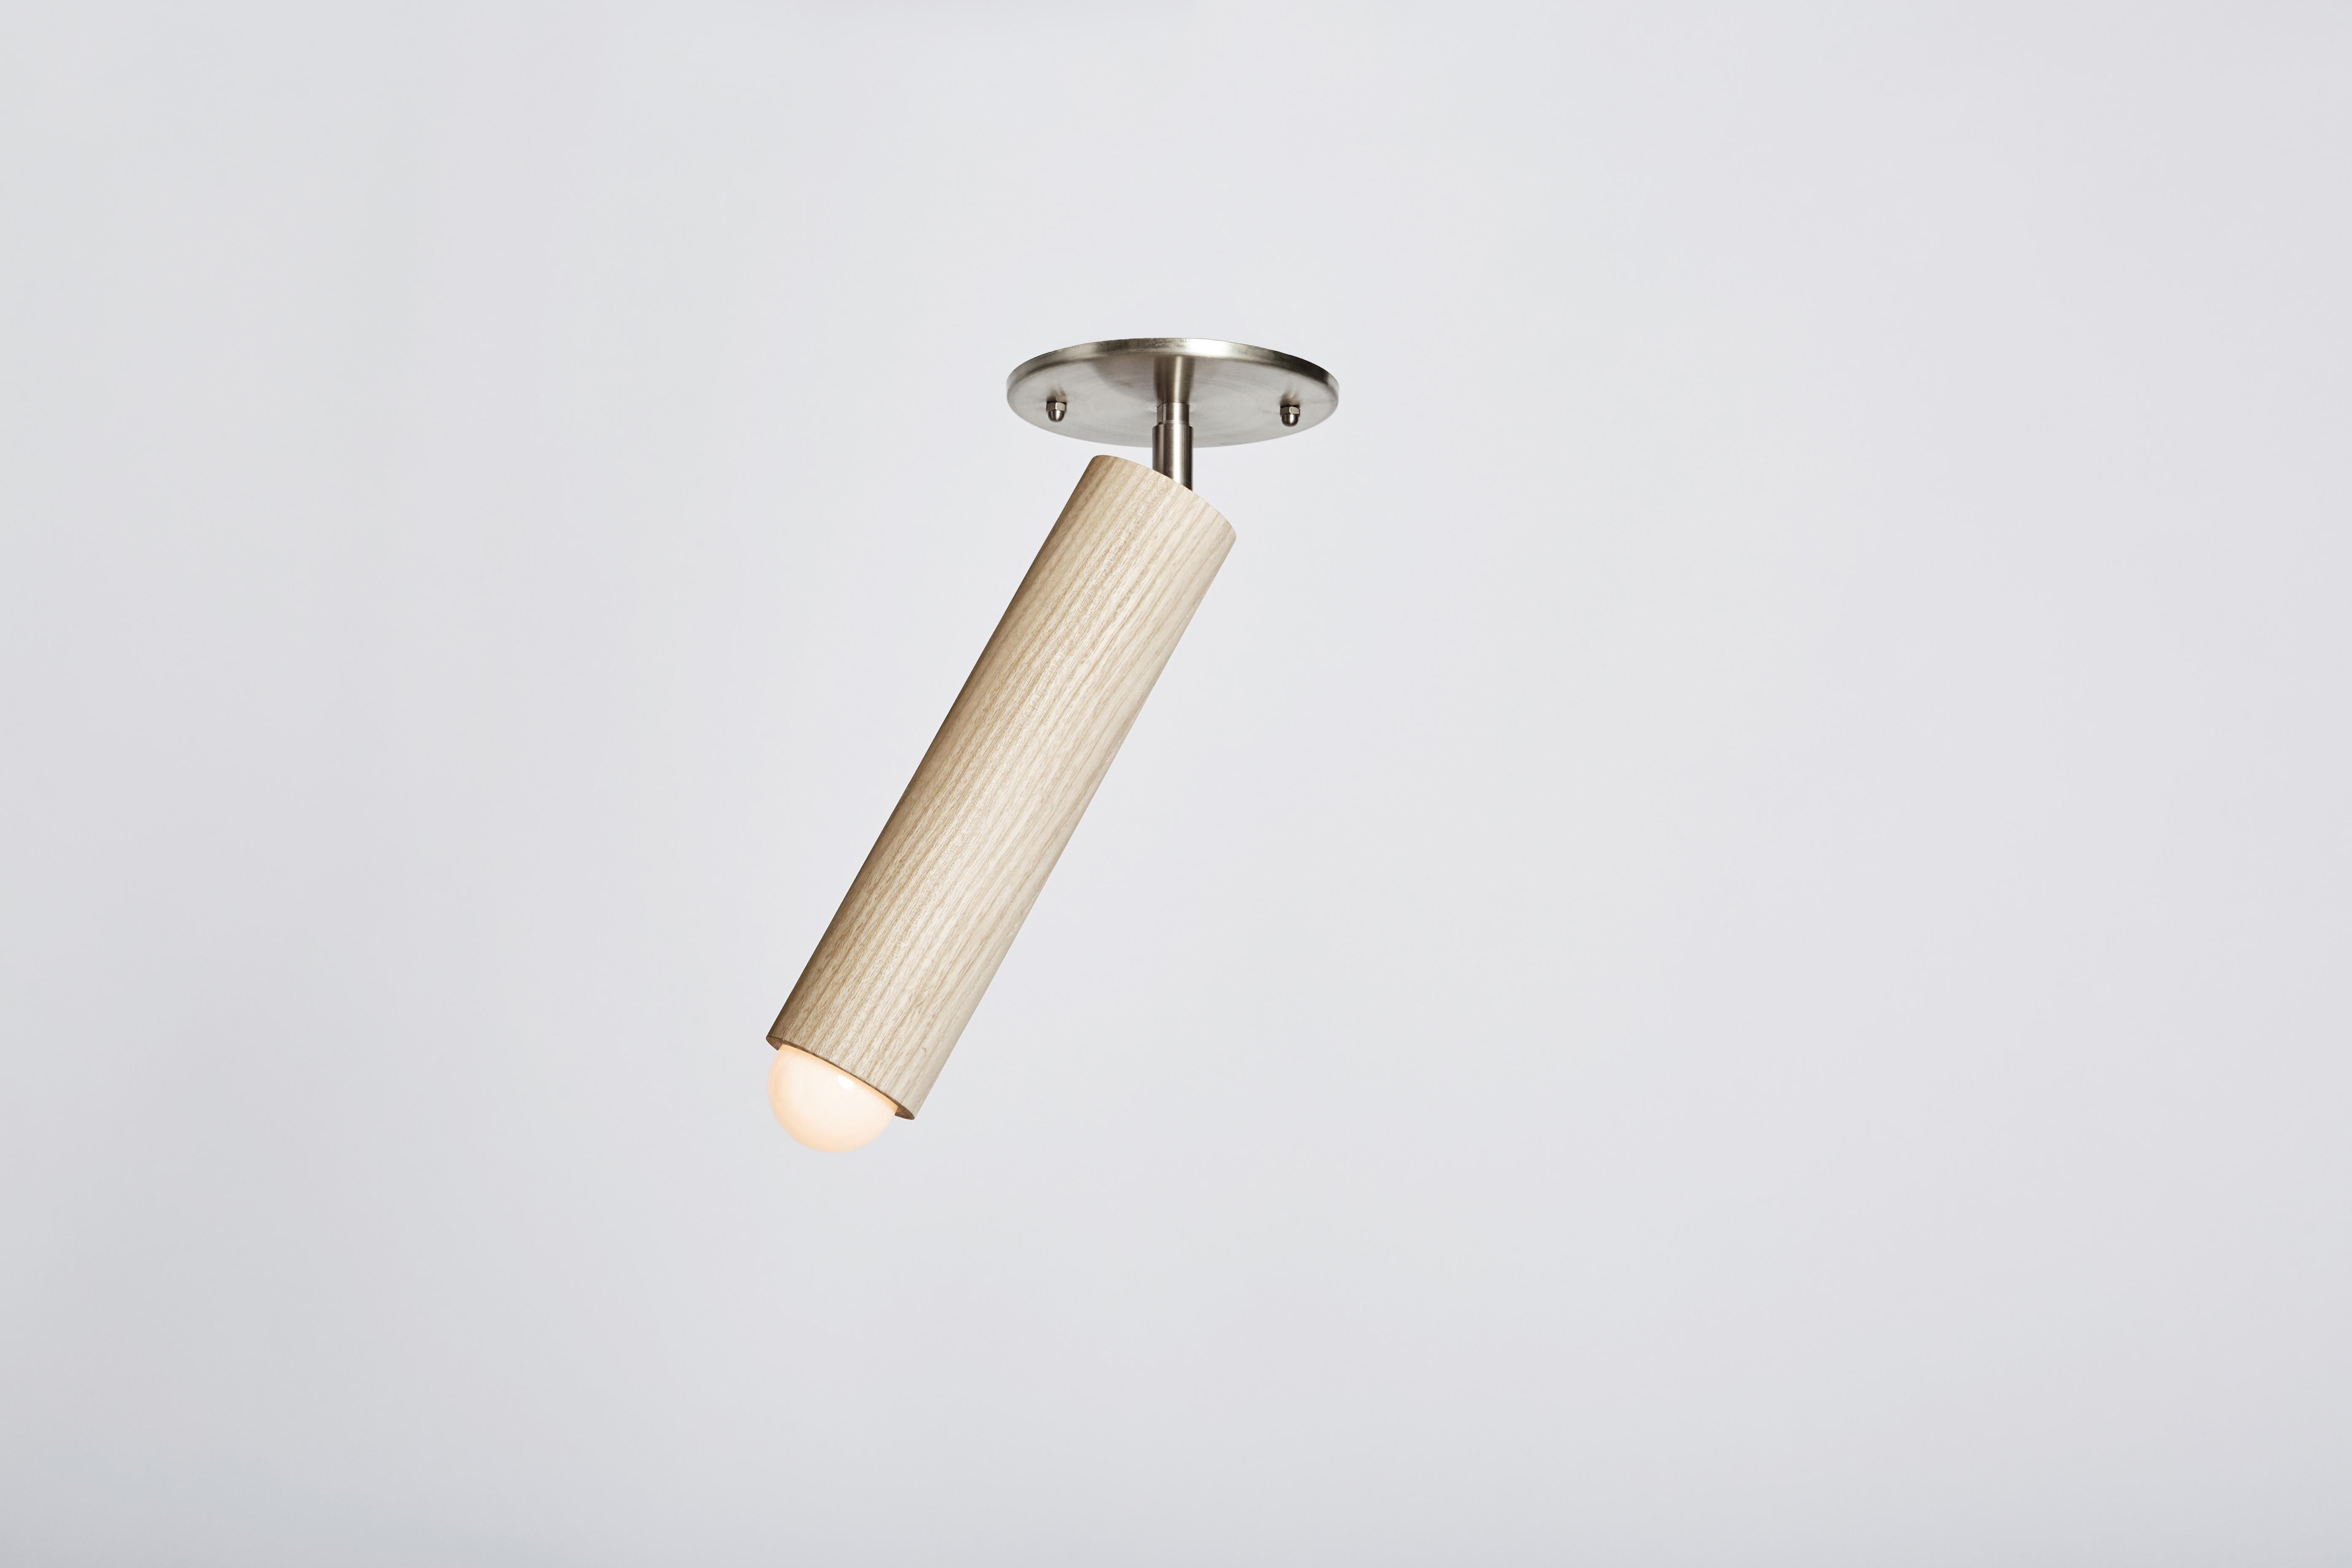 The LODGE FLUSH MOUNT is composed of a singular wooden column suspended from a metal canopy. The fixture swivels from side to side, directing light from a softly glowing bulb. Made in the USA, UL listed.

These fixtures are a custom Bleached Maple